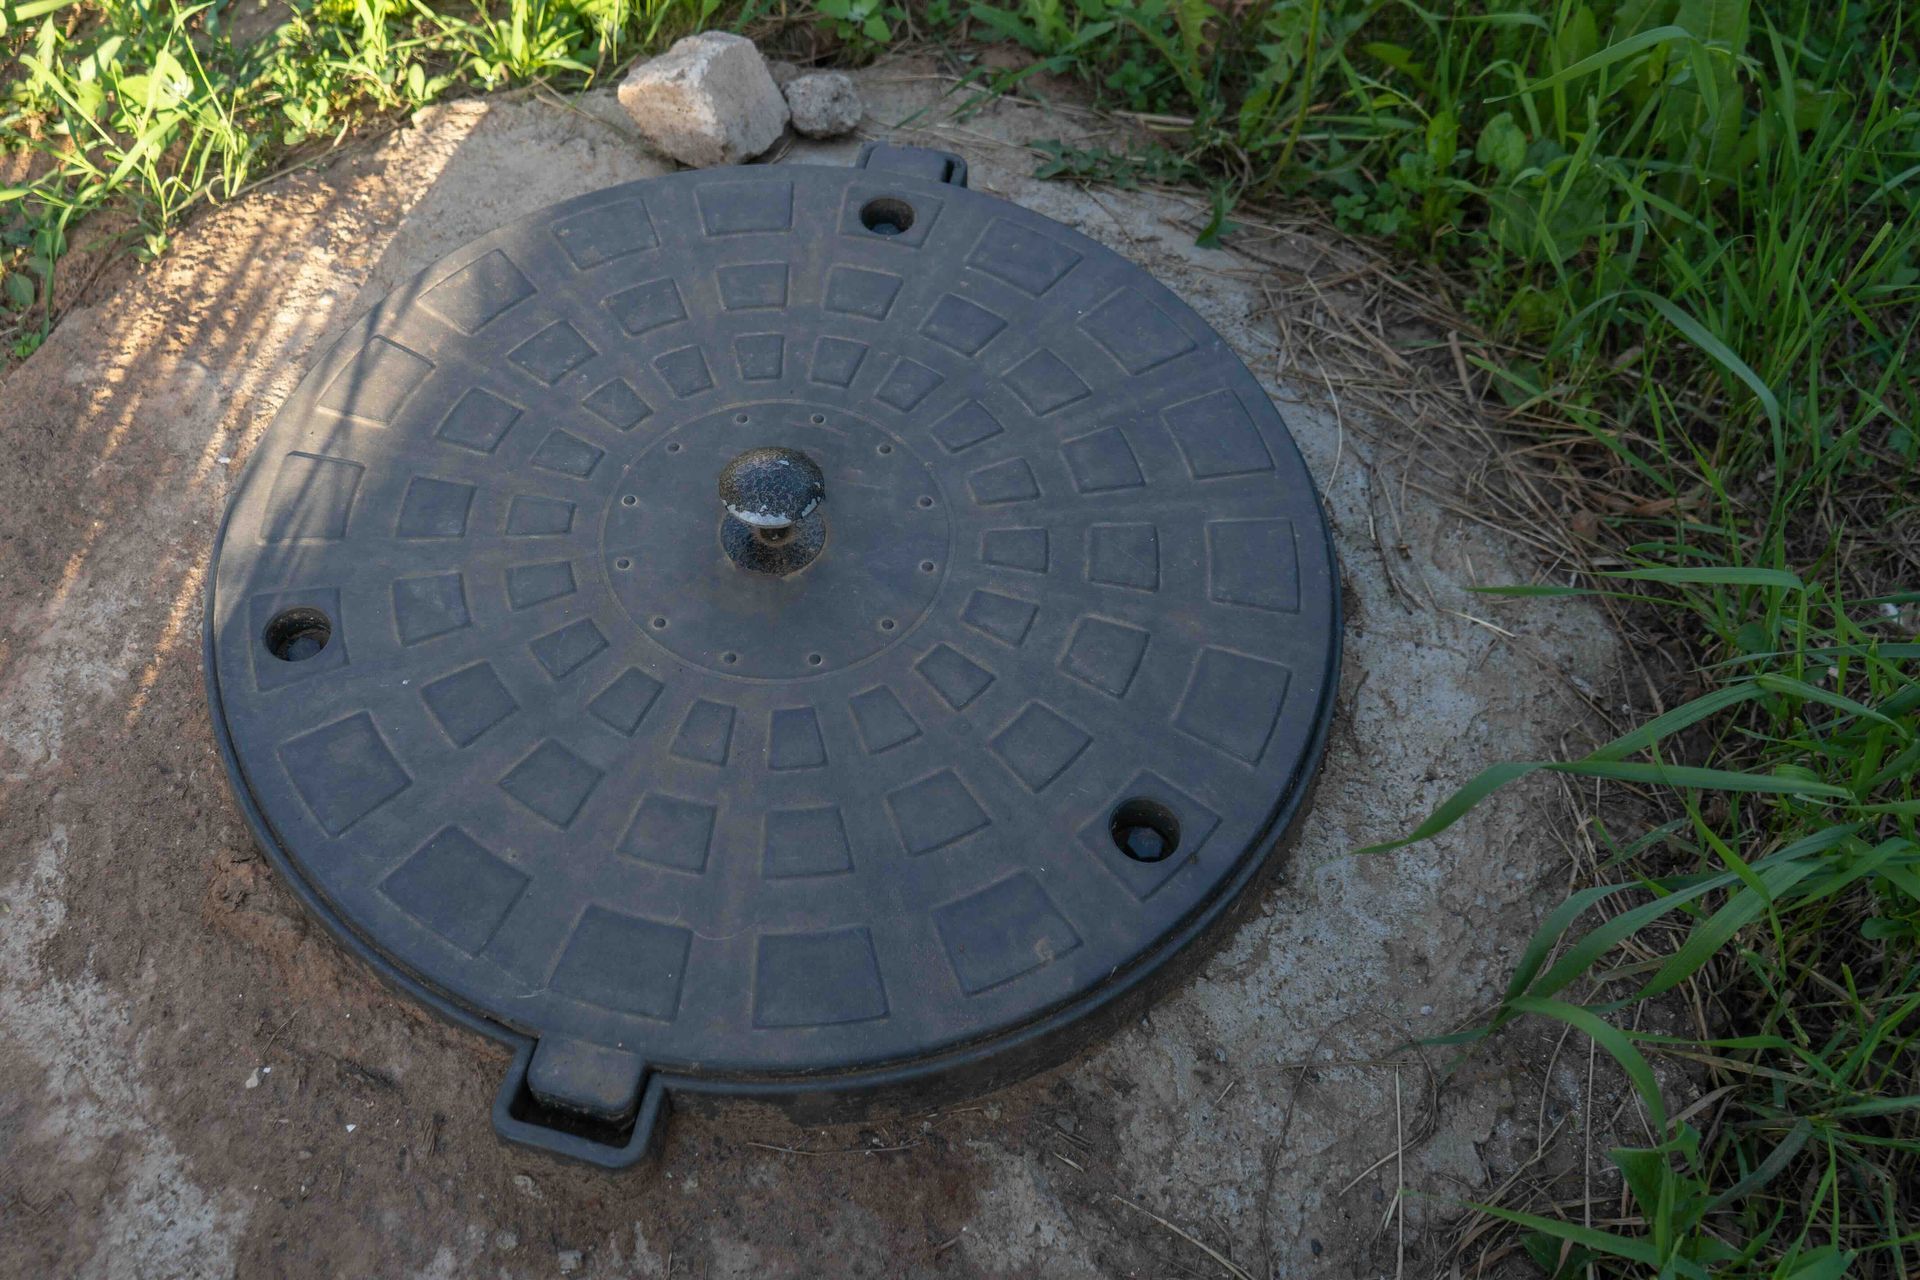 A septic tank lid on top of a pile of dirt.